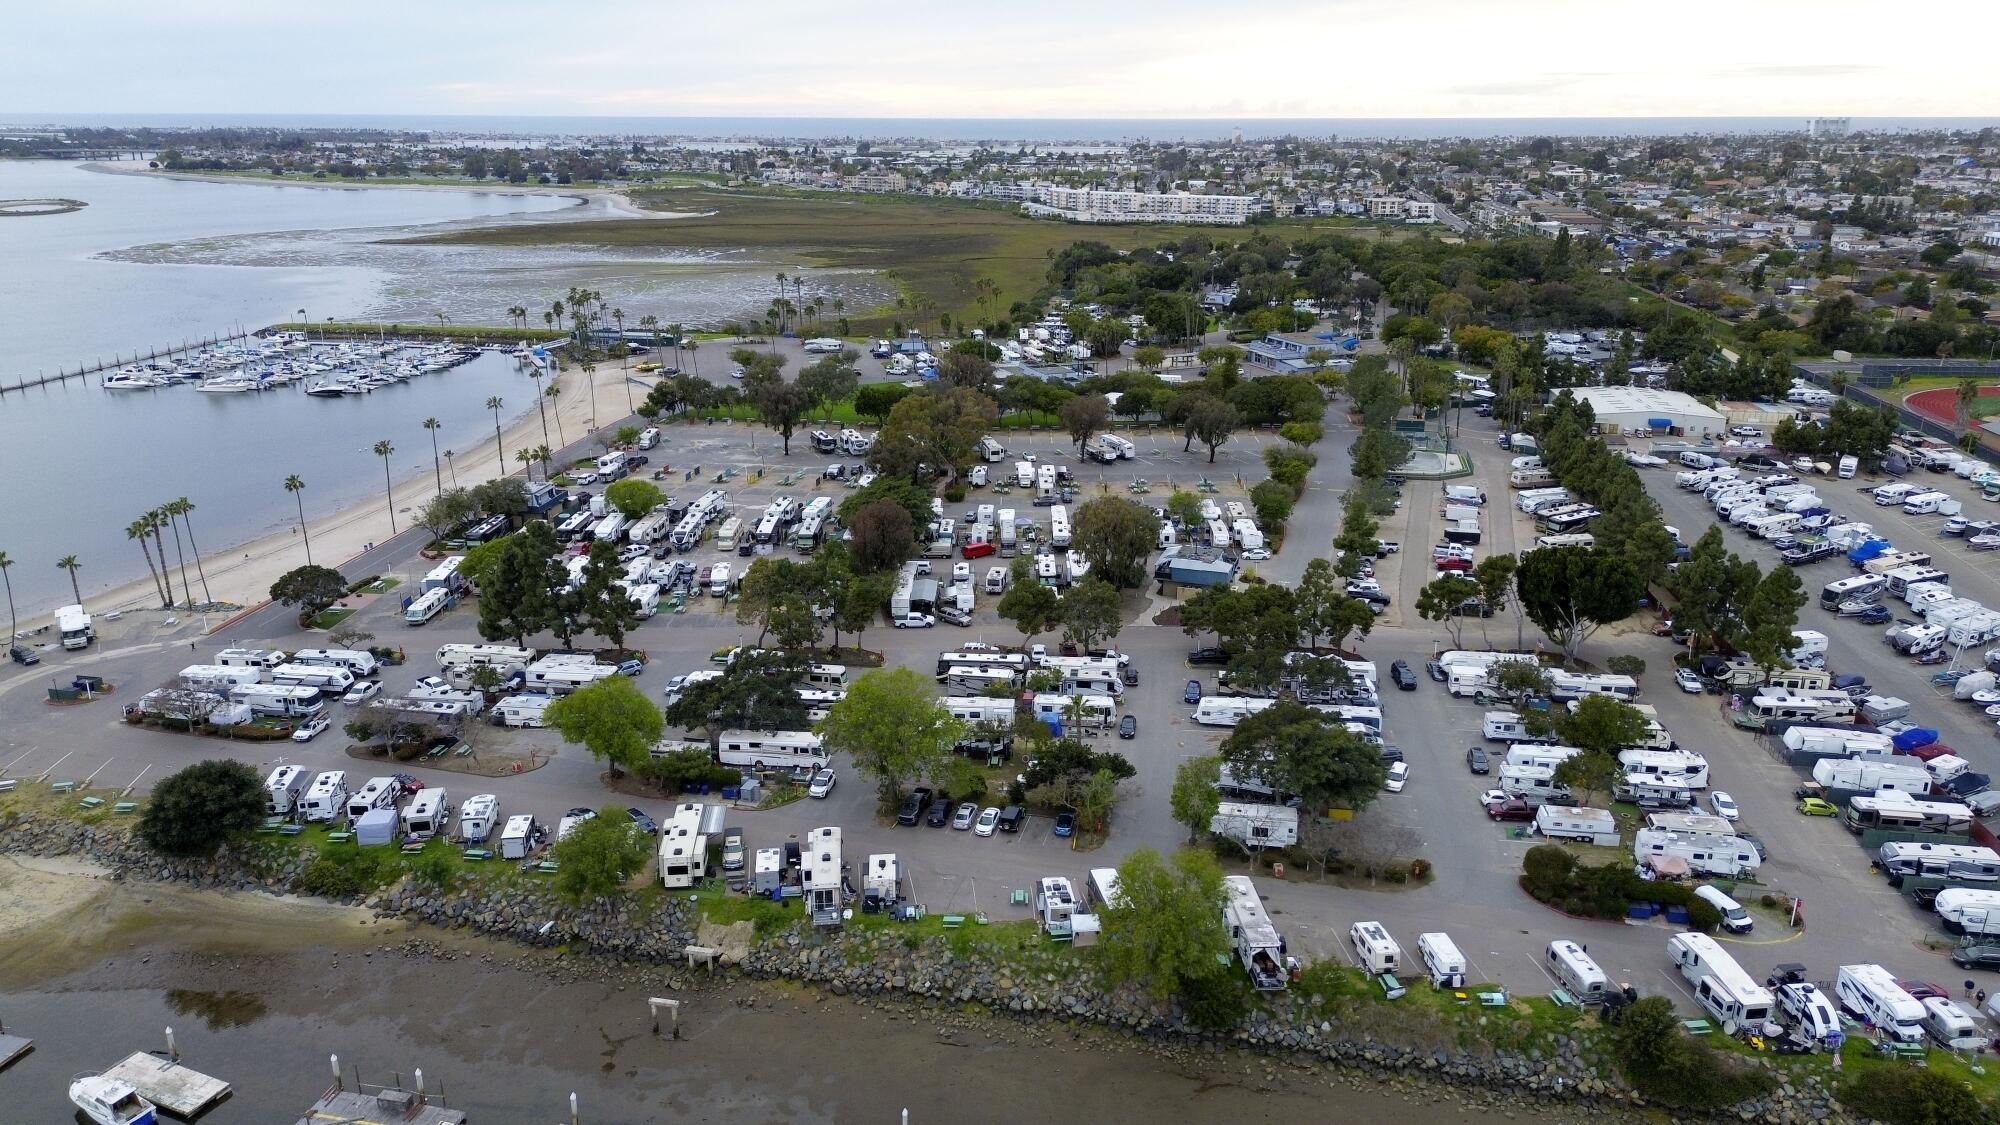 A drone view shows rows of RVs parked at a campground.